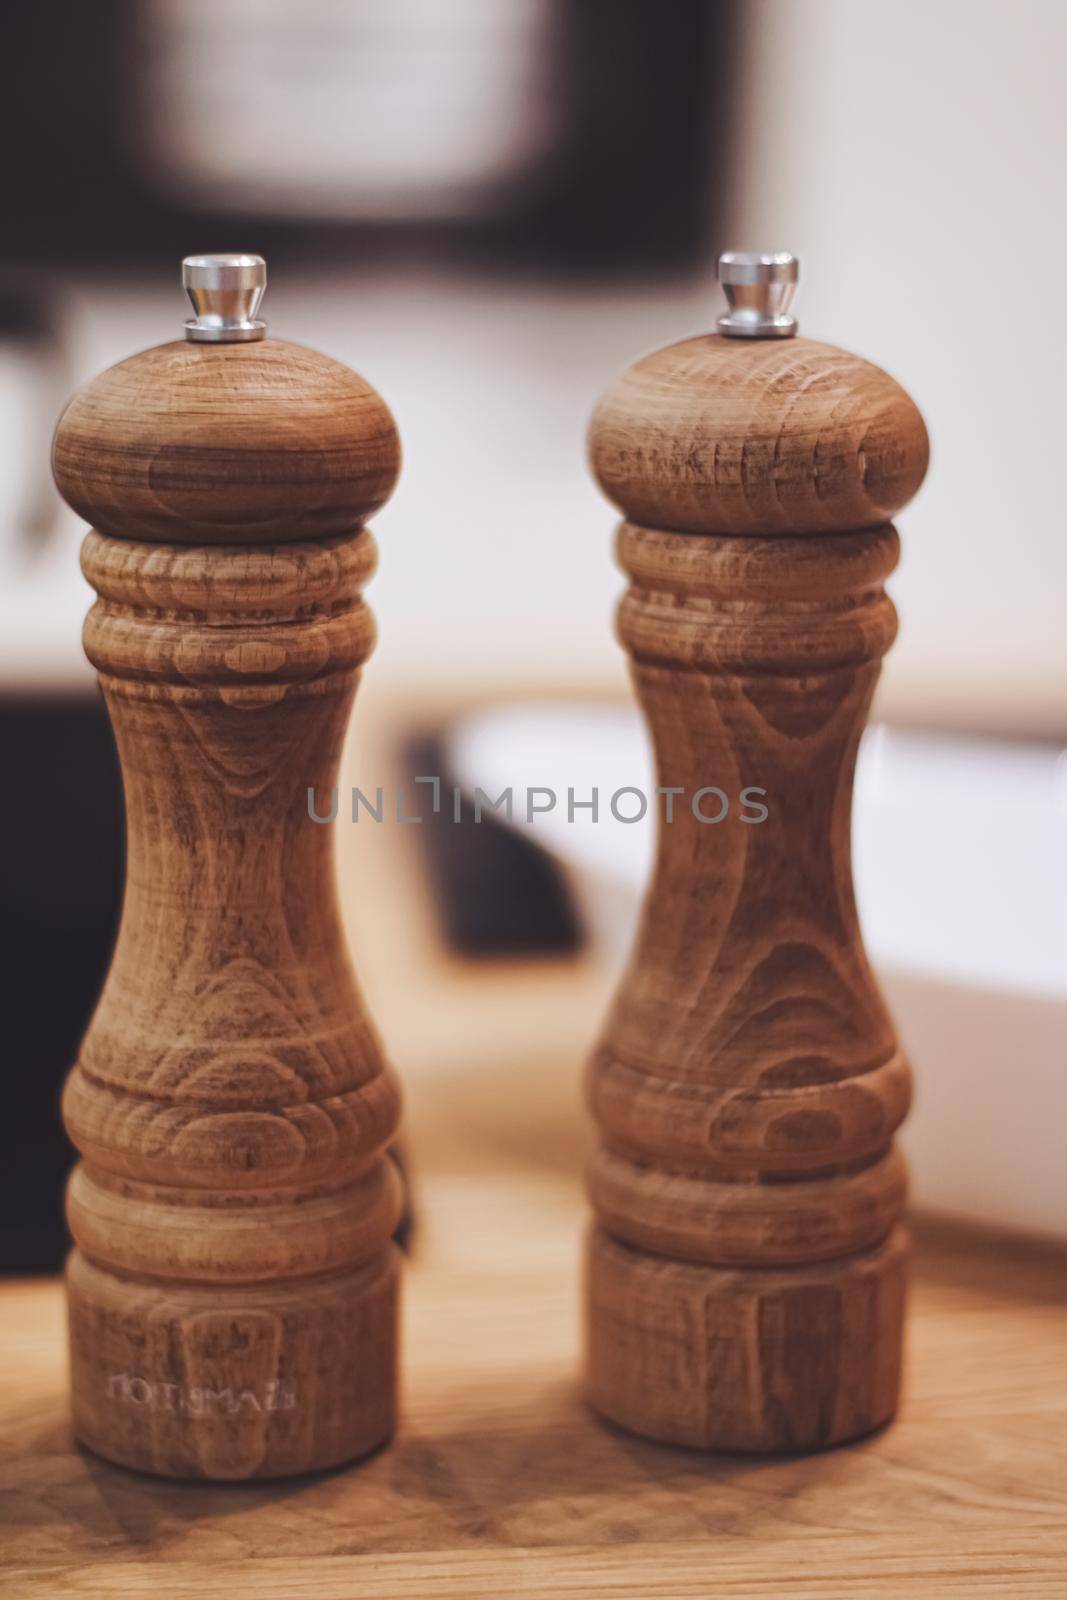 Wooden salt and pepper shaker set in the kitchen, eco-friendly product and home decor idea